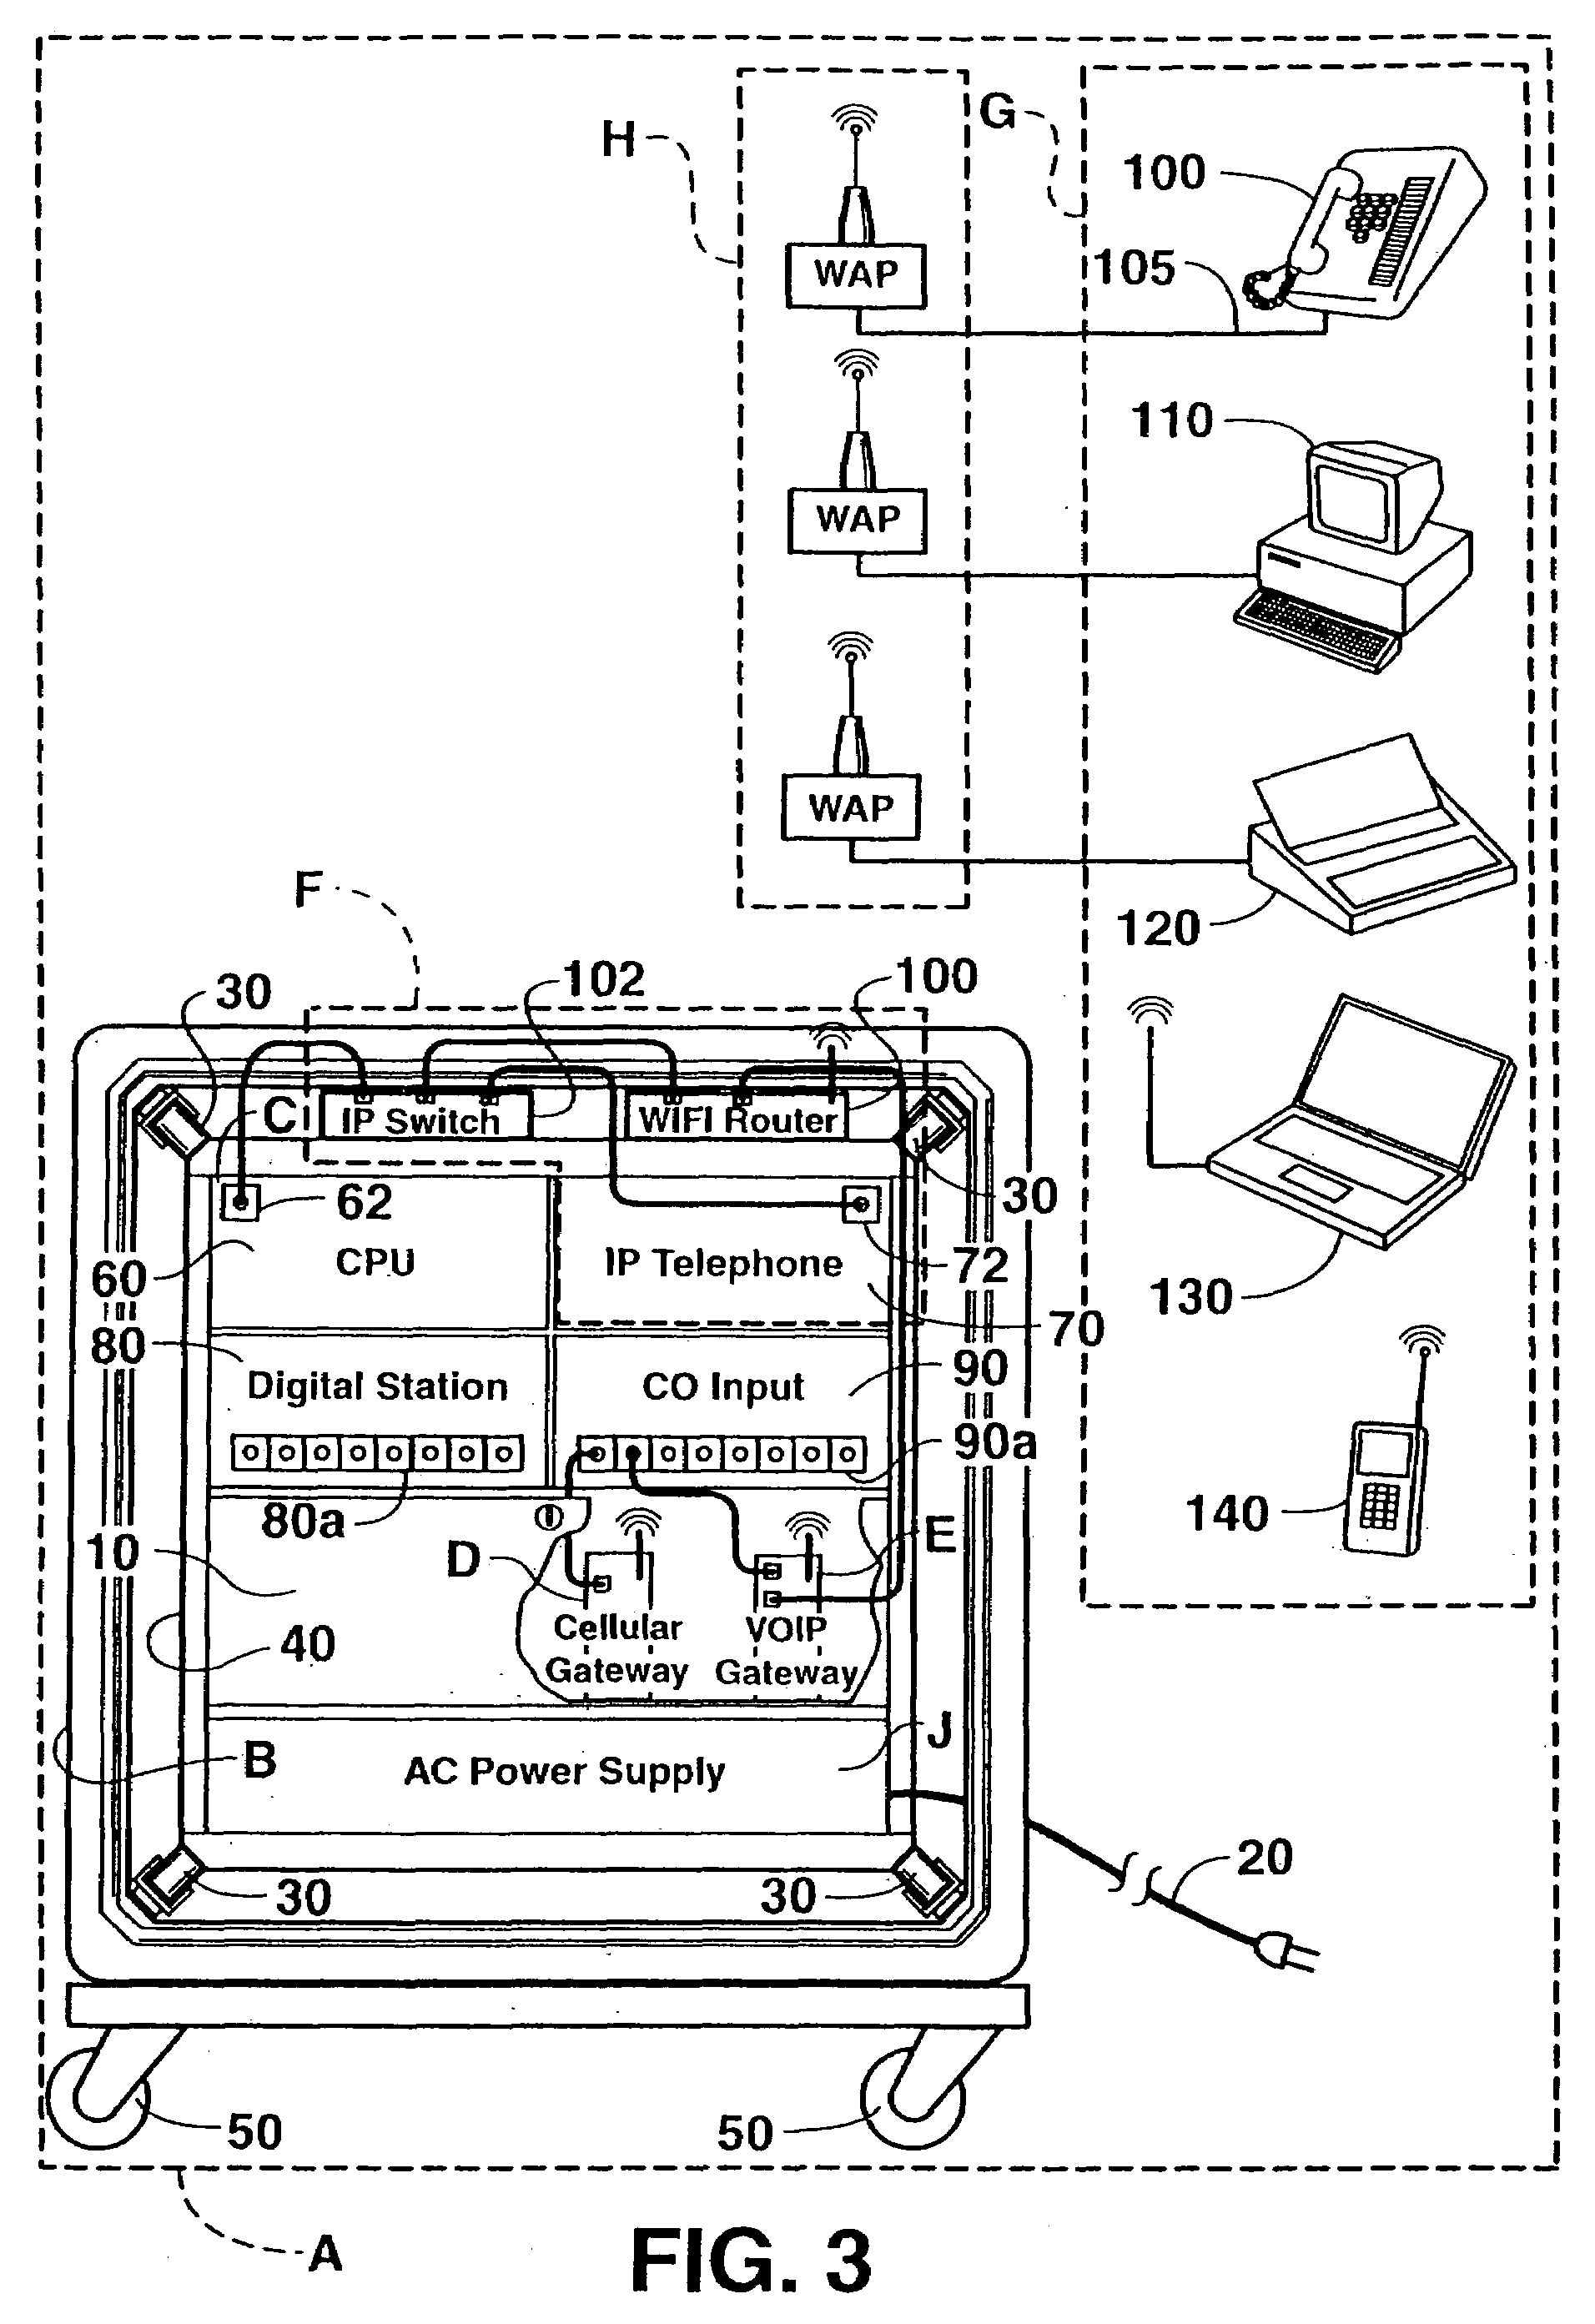 Full service mobile wireless telecommunication system and method